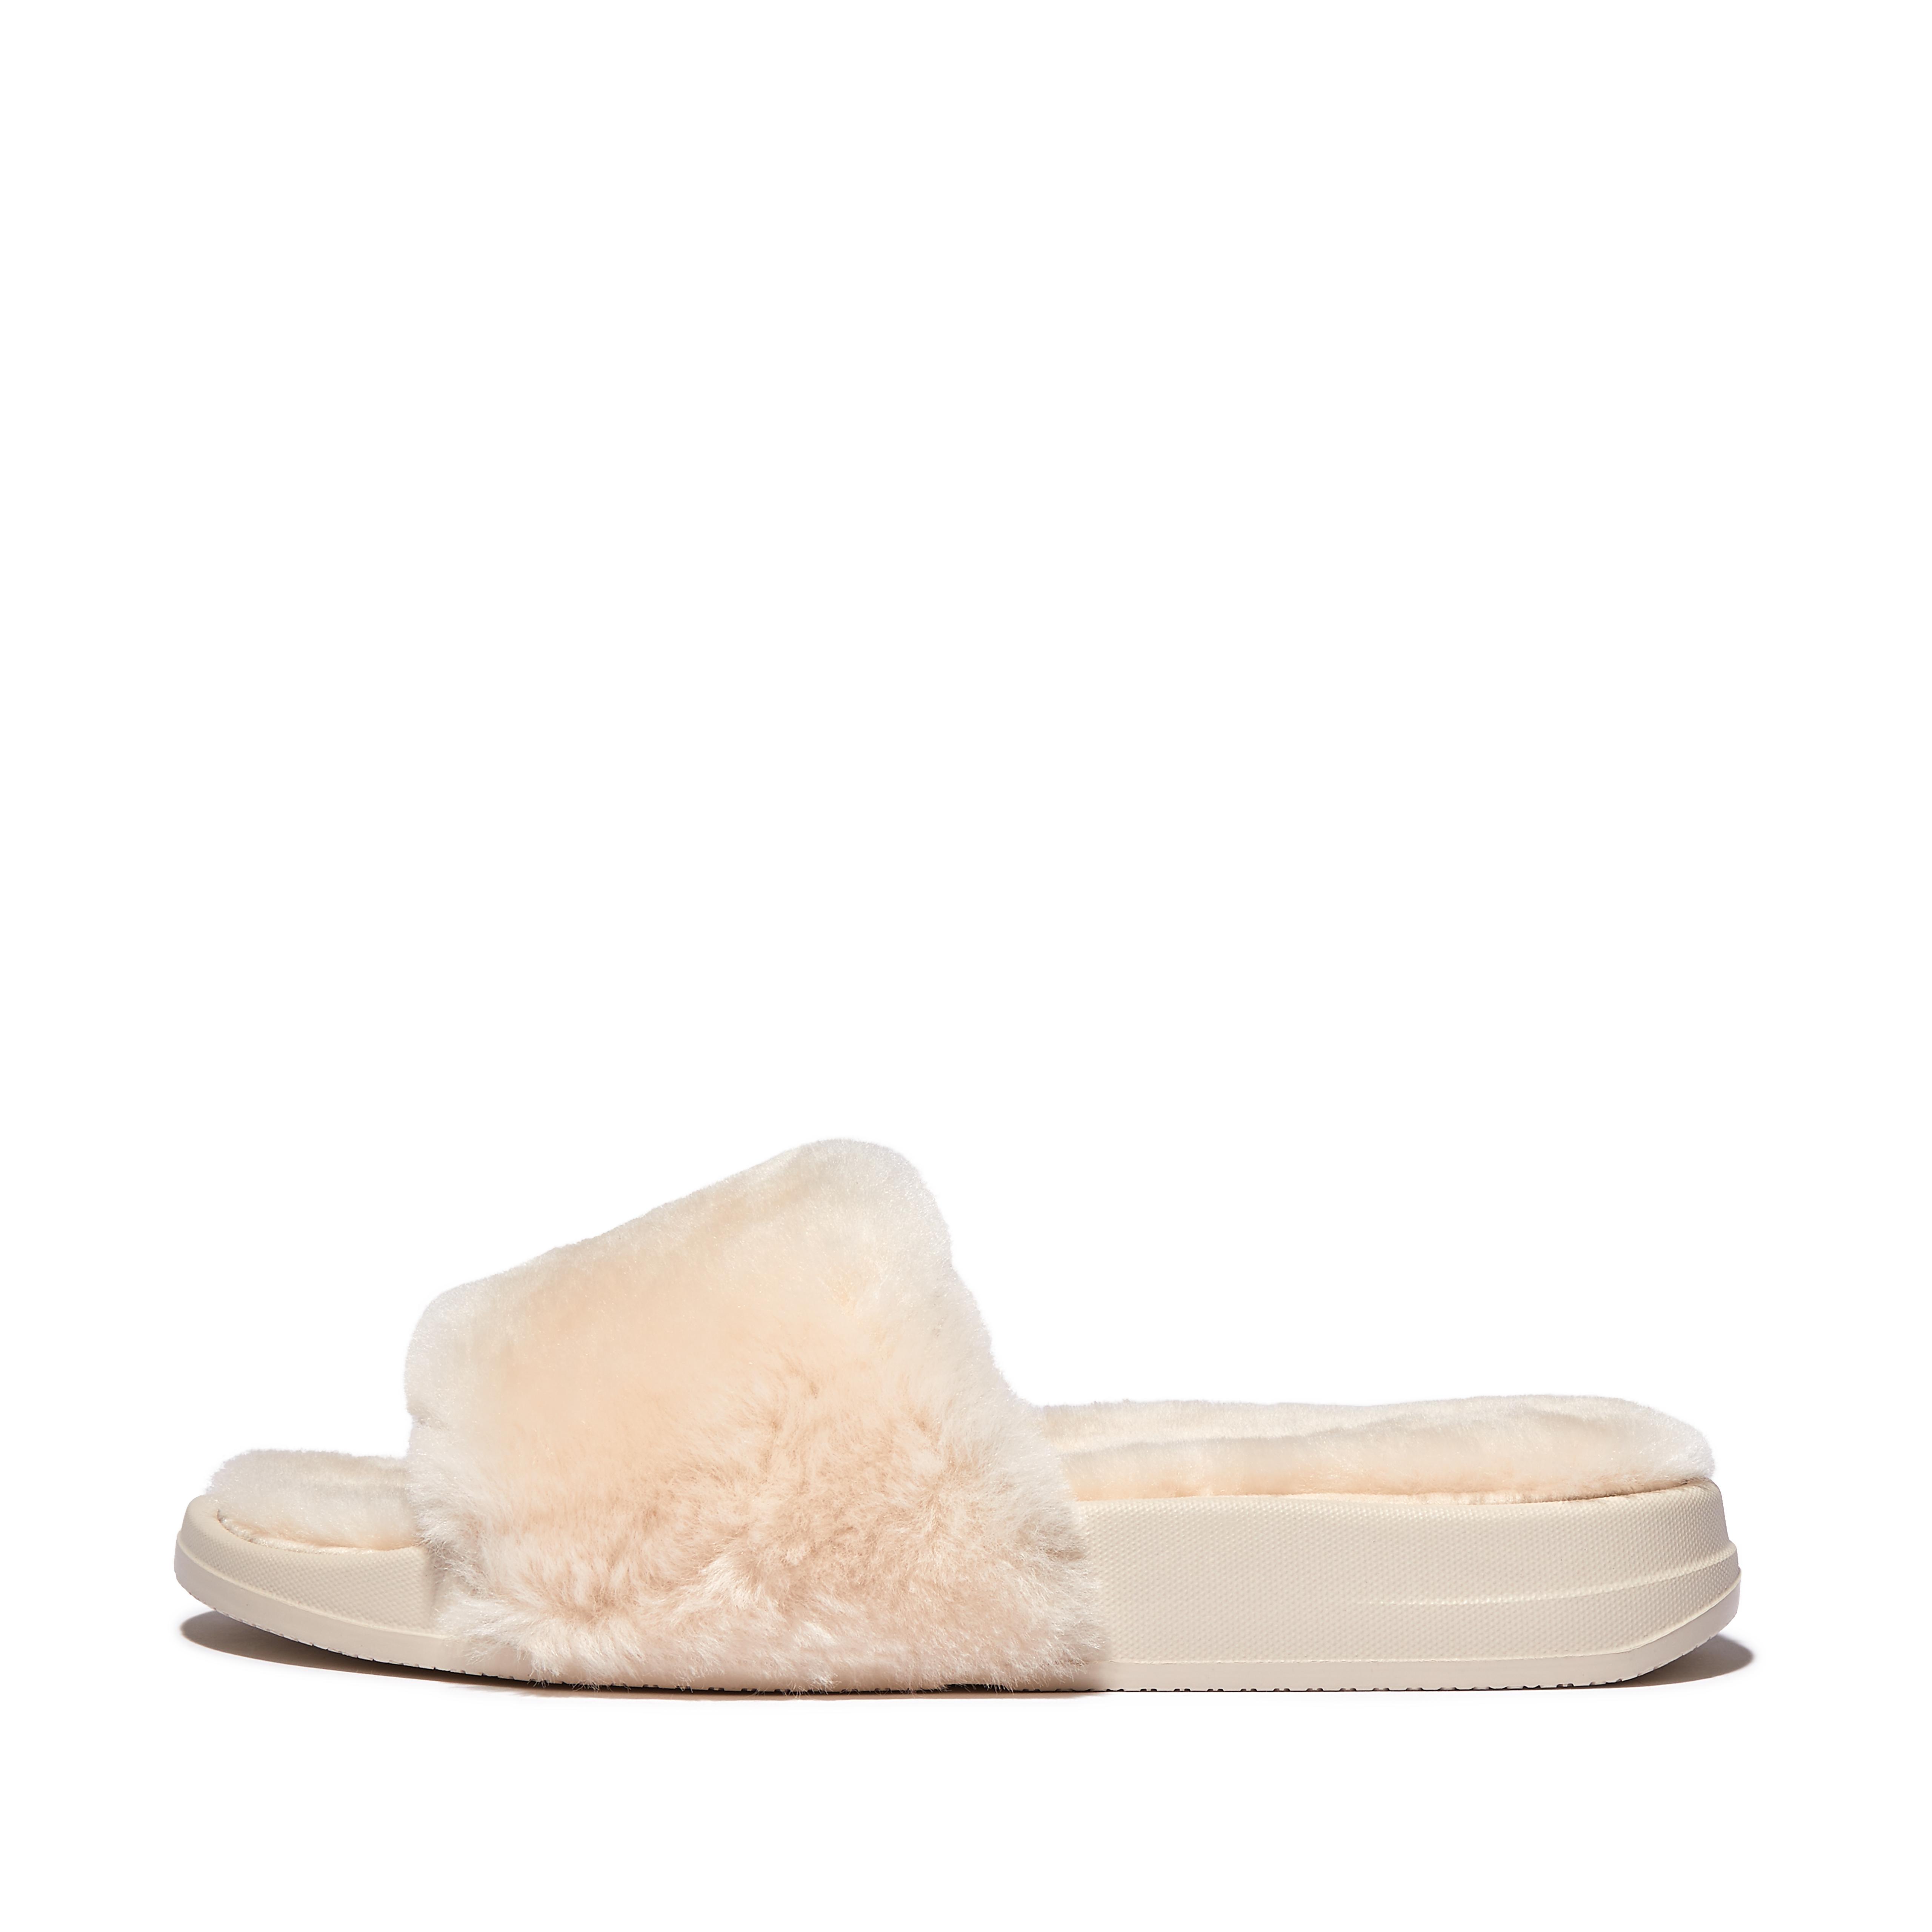 Fitflop Shearling Slides,Ivory